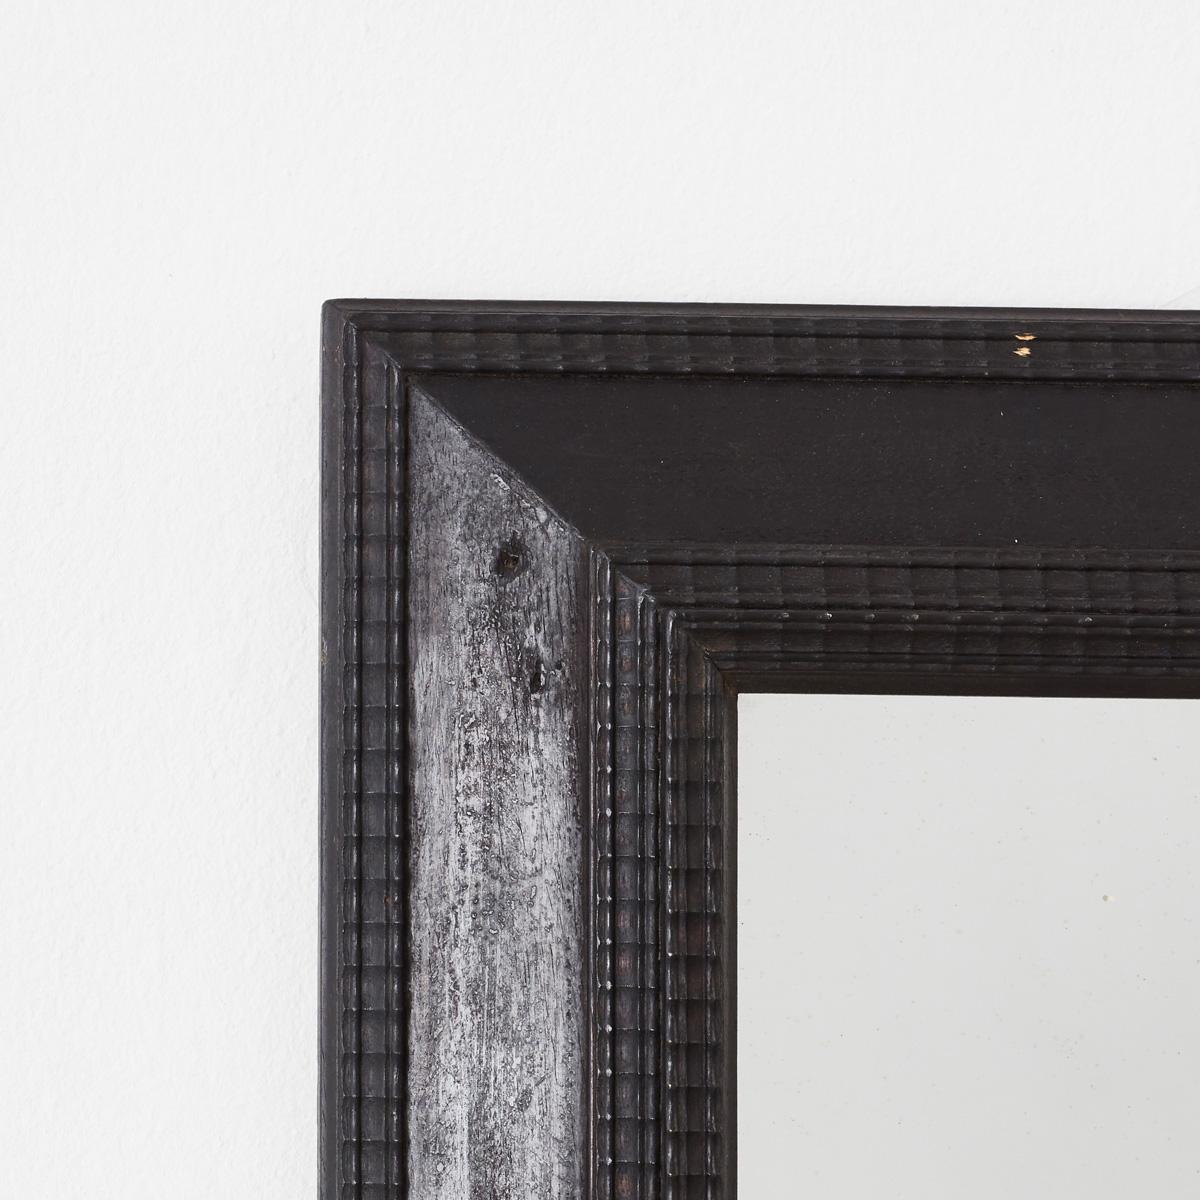 Made in Italy well over one hundred years ago, the ebonised wooden frame of this striking ripple frame mirror is crafted in an 17th and 18th Century Dutch style. Its surface is intricately detailed and textured with carved patterns of indentations